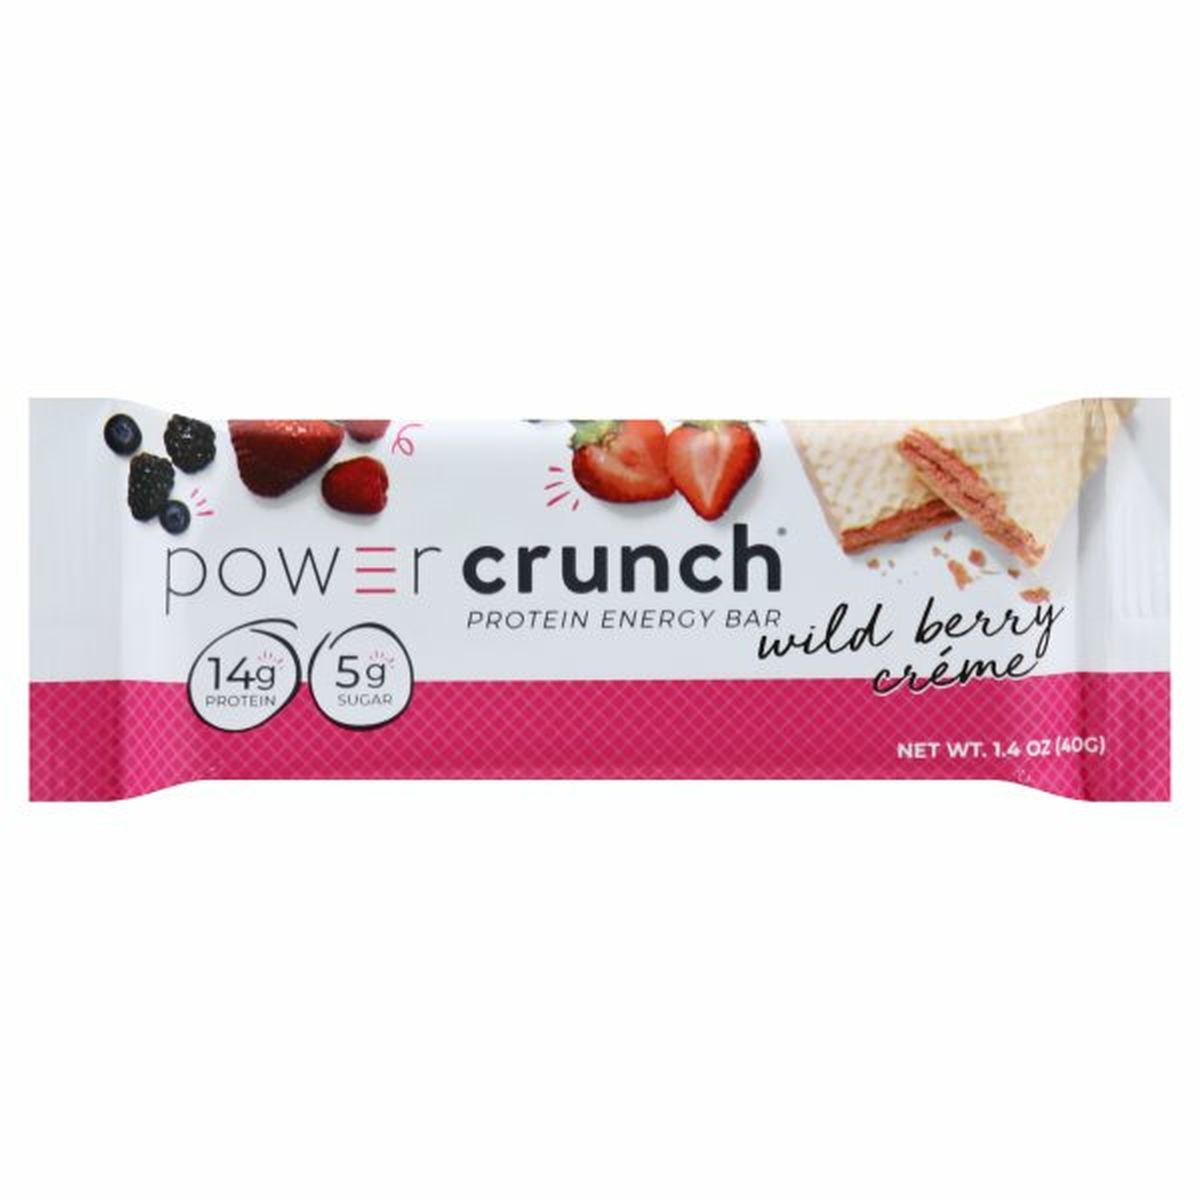 Calories in Power Crunch Protein Energy Bar, Wild Berry Creme